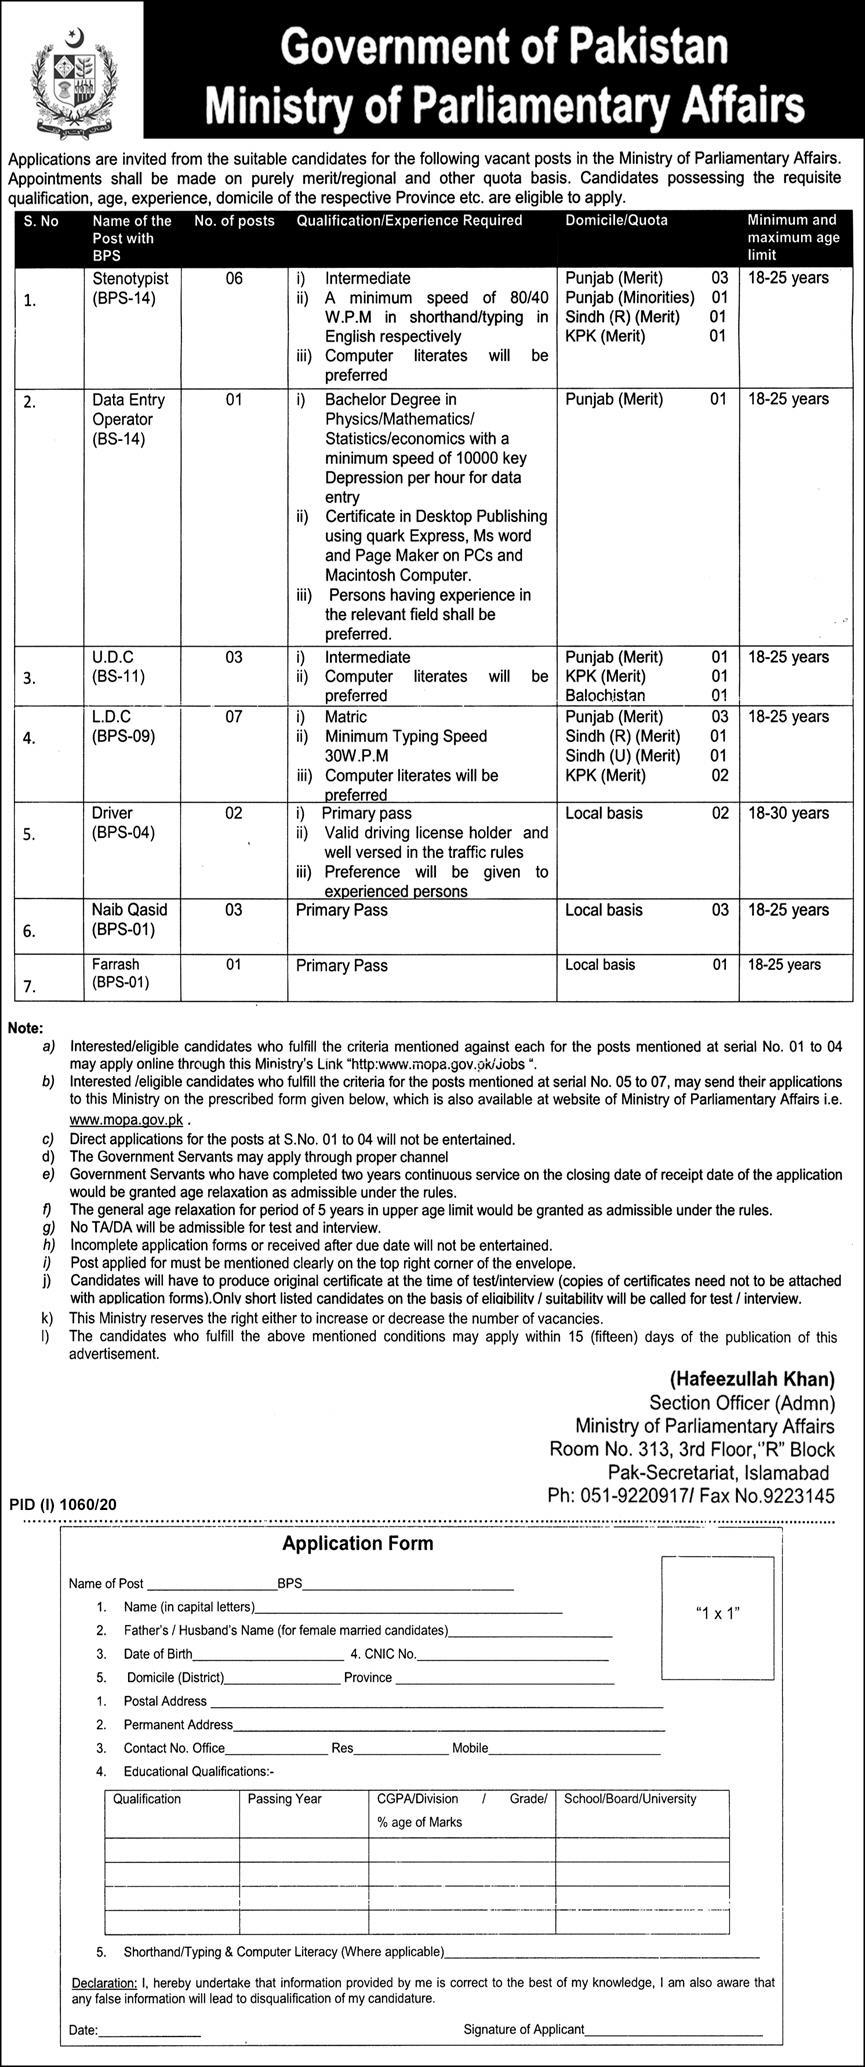 Ministry of Parliamentary Affairs Jobs 2020